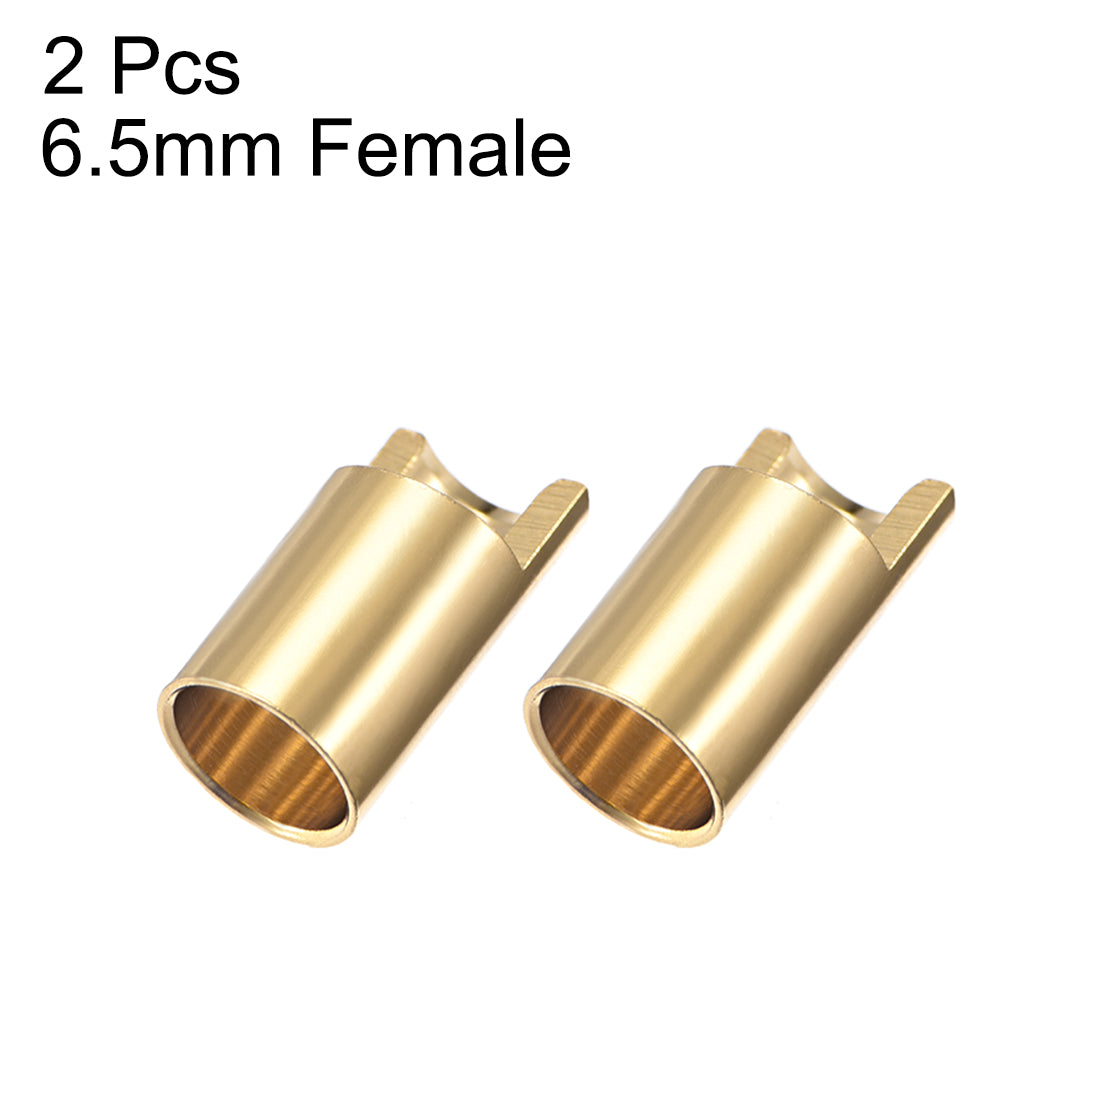 uxcell Uxcell 6.5mm Bullet Connector Gold Plated Banana Plugs Female 2pcs